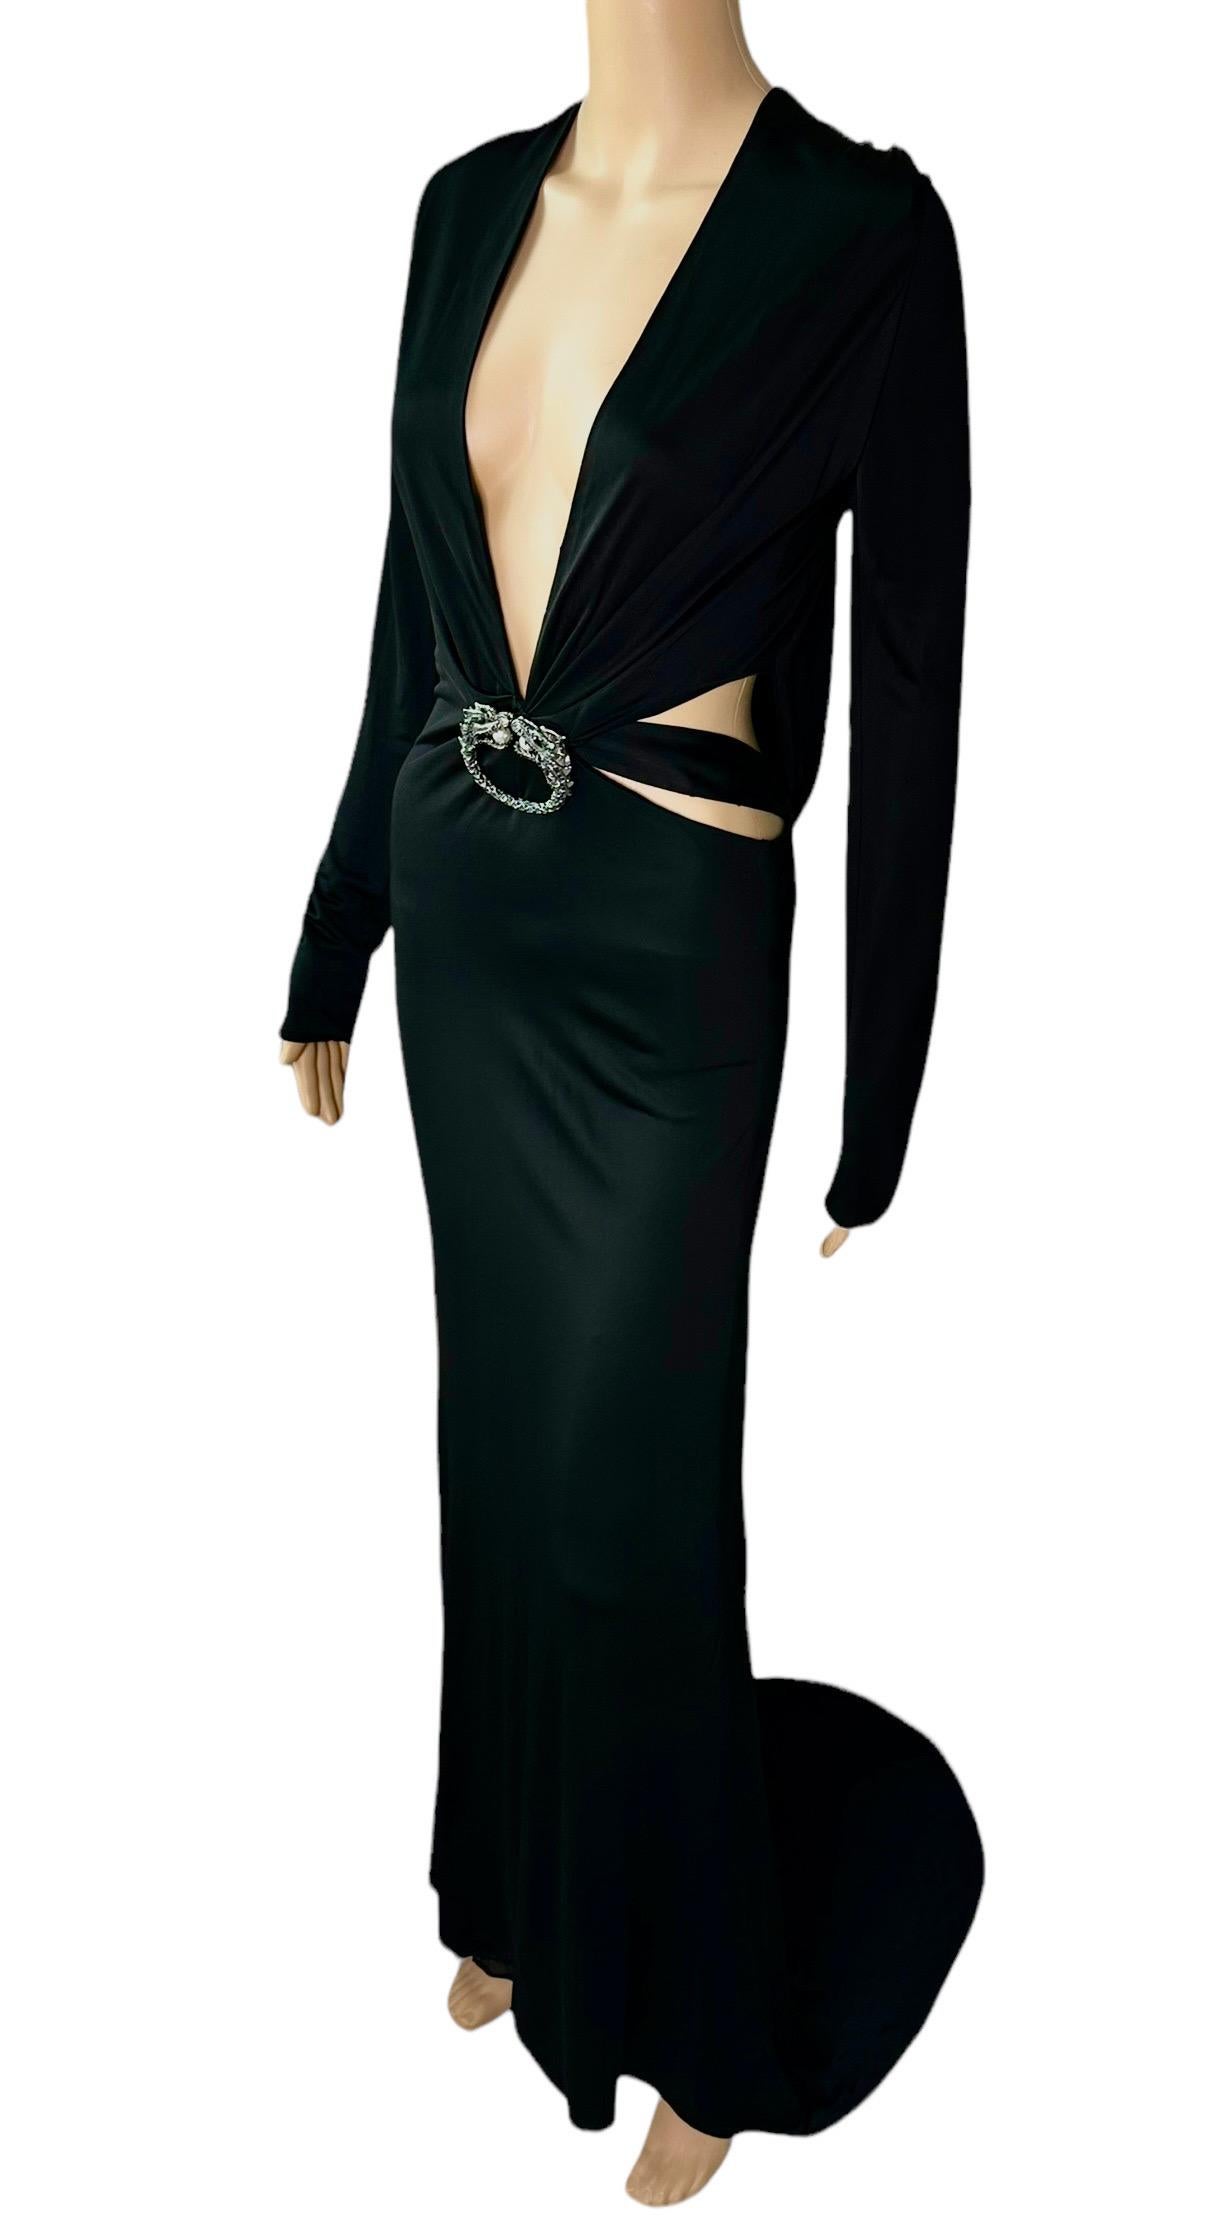 Tom Ford for Gucci F/W 2004 Runway Embellished Plunging Cutout Black Evening Dress Gown IT 42

Finale Look 45 from Fall 2004 Collection in the white color.



